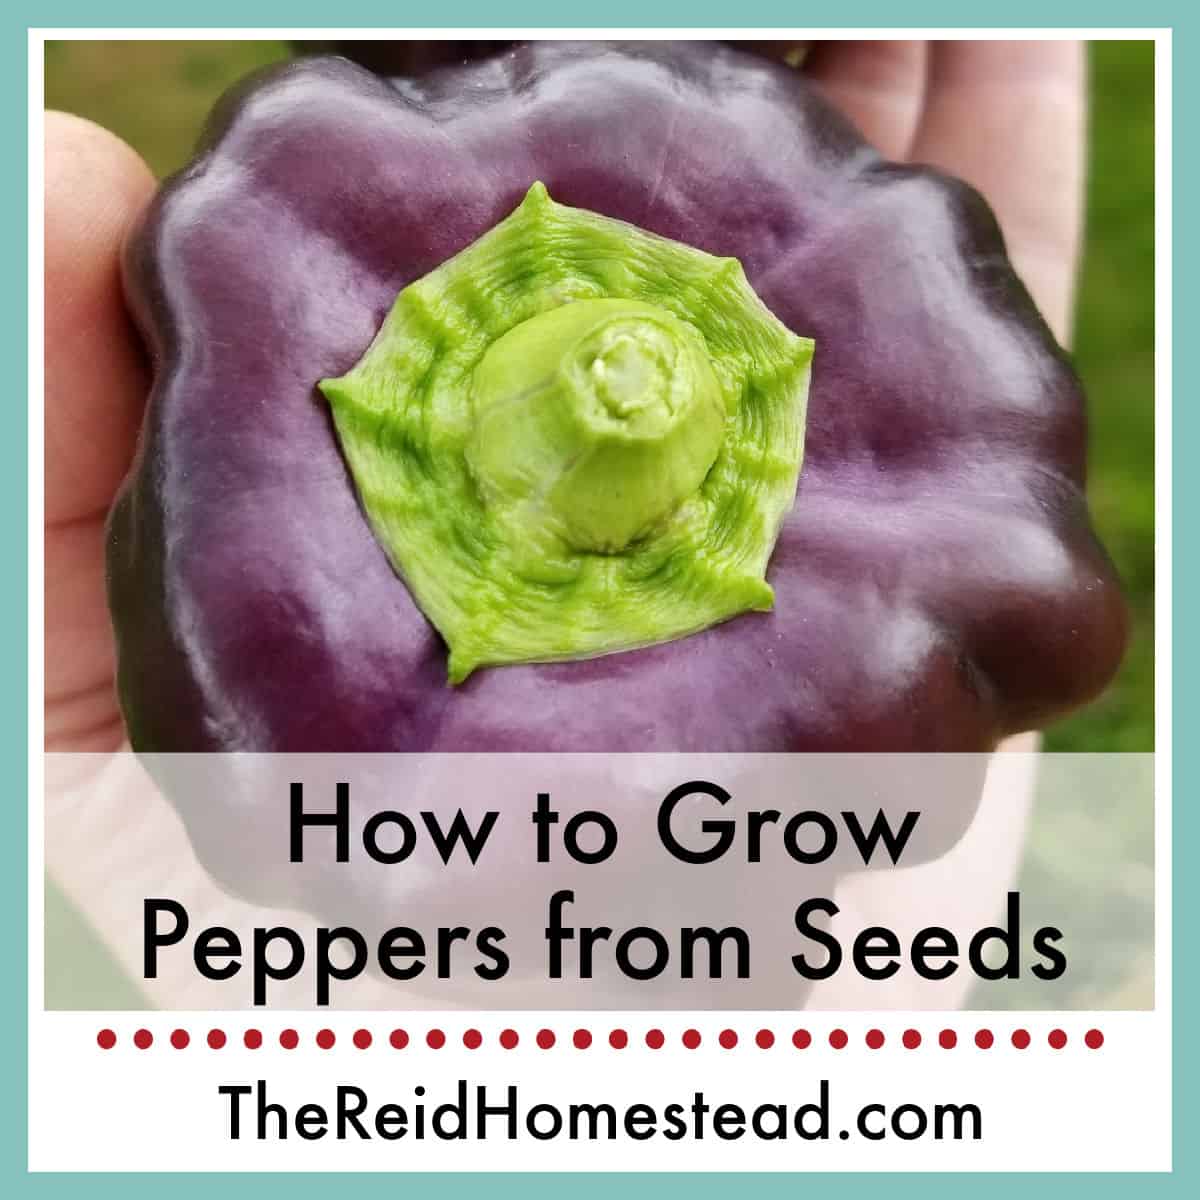 close up of a purple bell pepper, text overlay How to Grow Peppers from Seeds